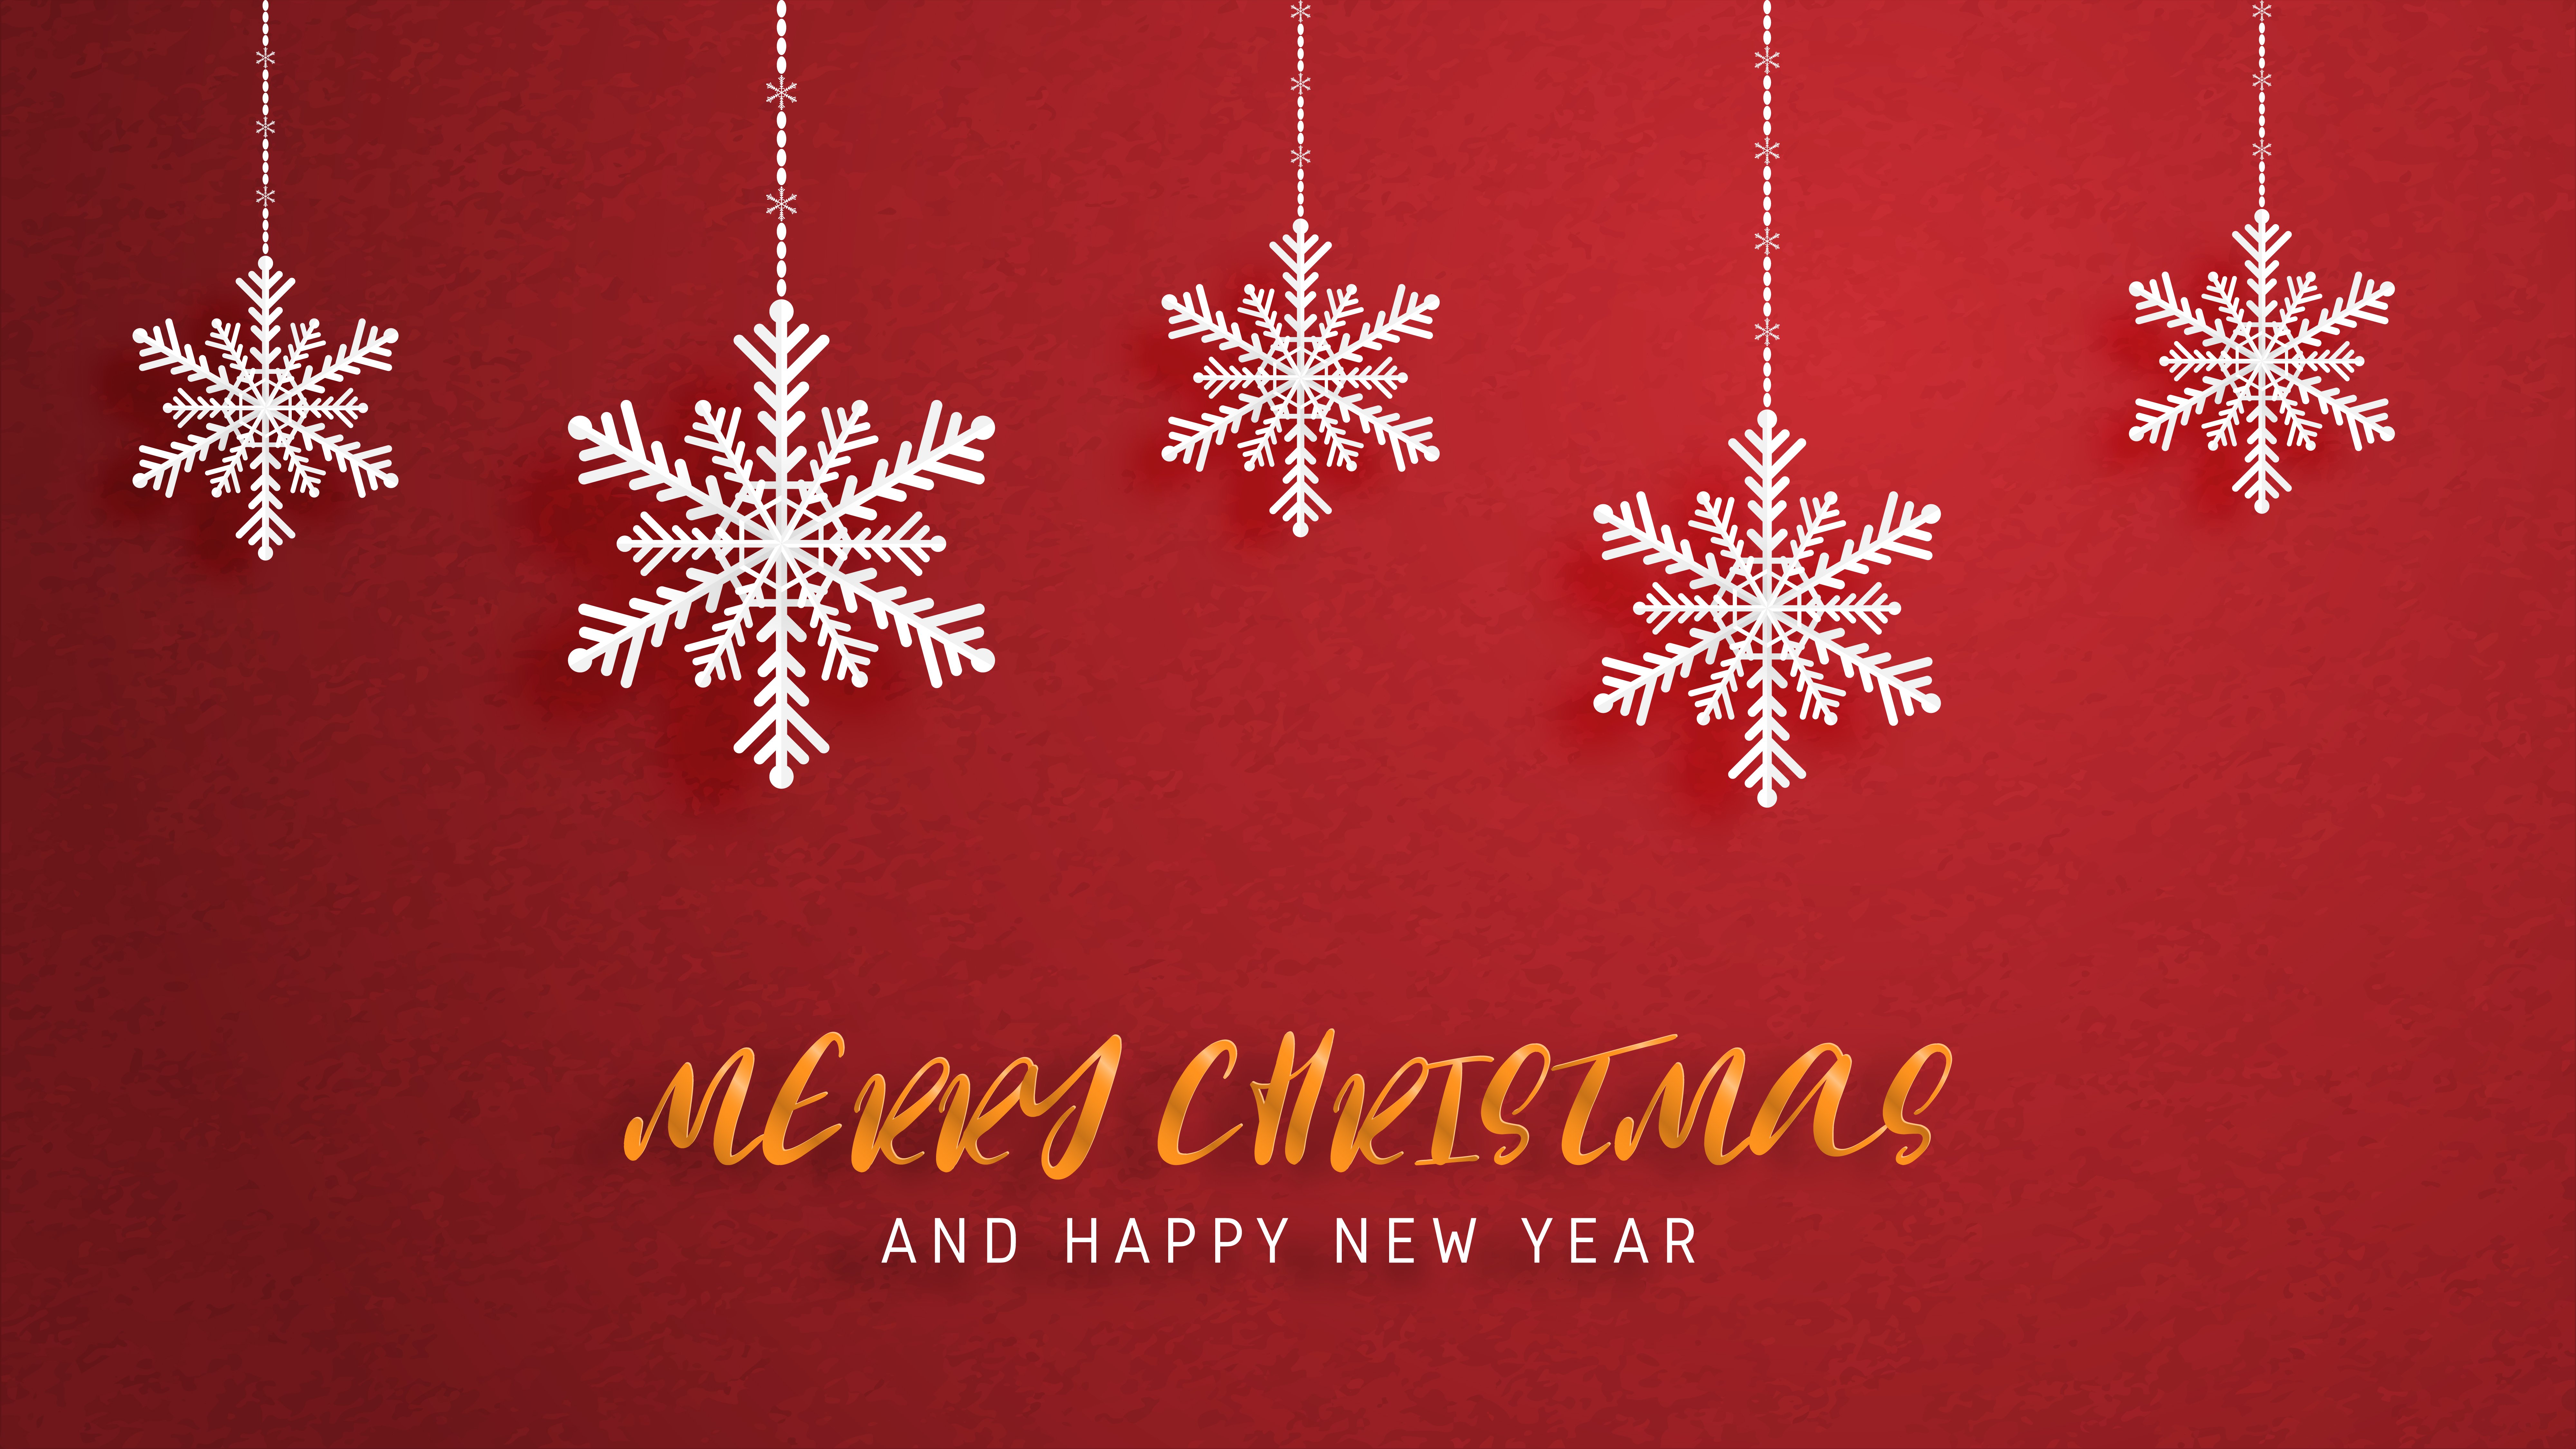 Merry Christmas and Happy new year greeting card in paper cut style. Vector illustration Christmas celebration on red background. Design for banner, flyer, poster, wallpaper